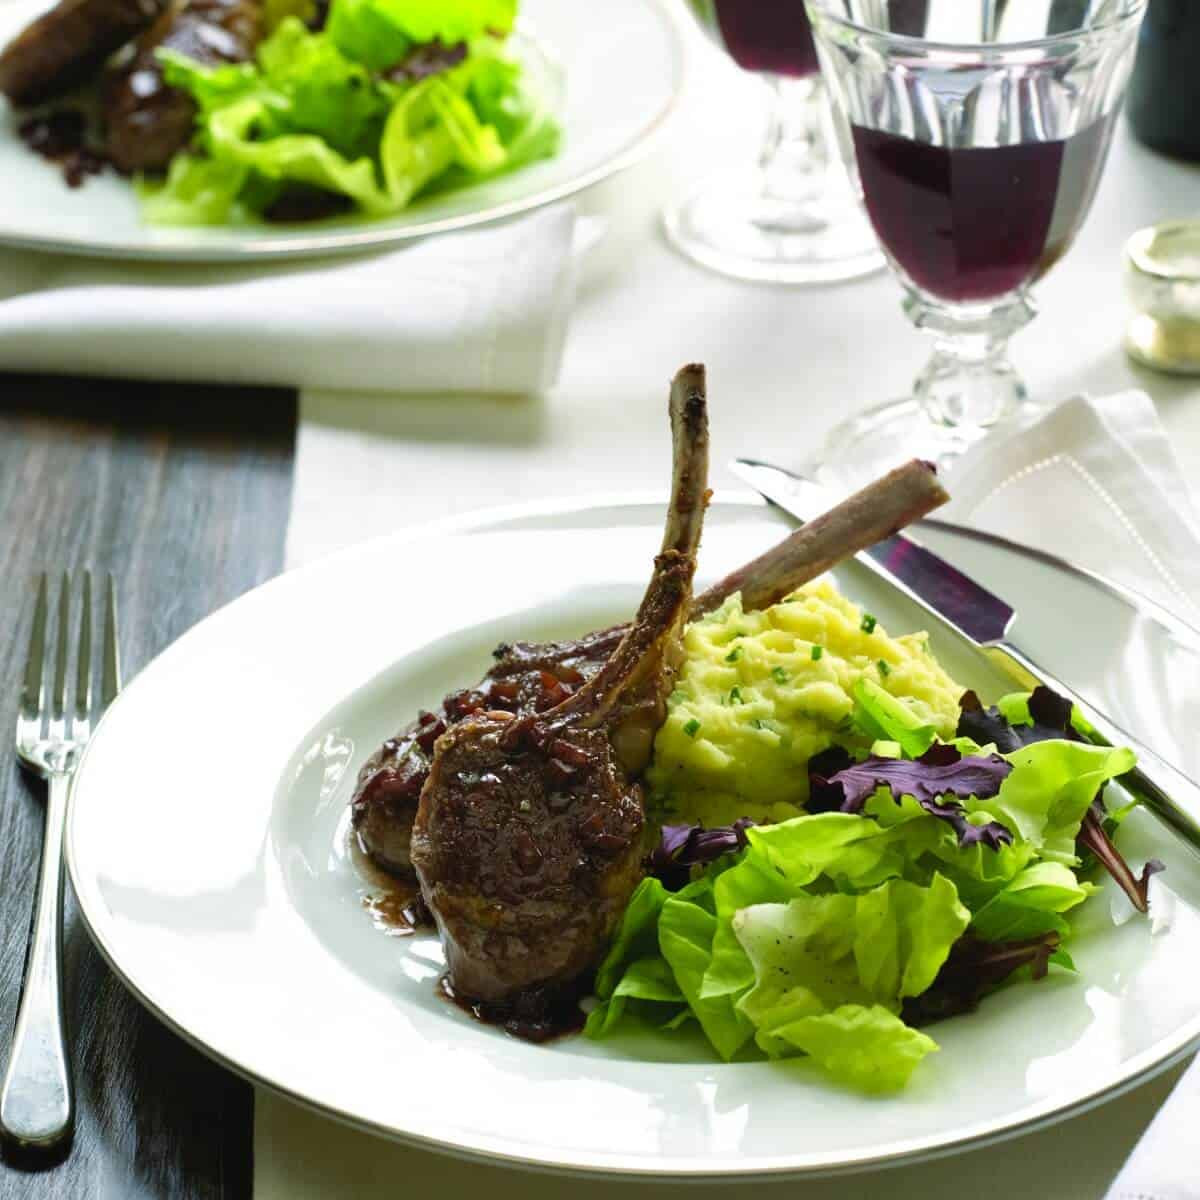 Red Wine Sauces For Lamb
 Baby Lamb Chops with Red Wine Sauce Recipe